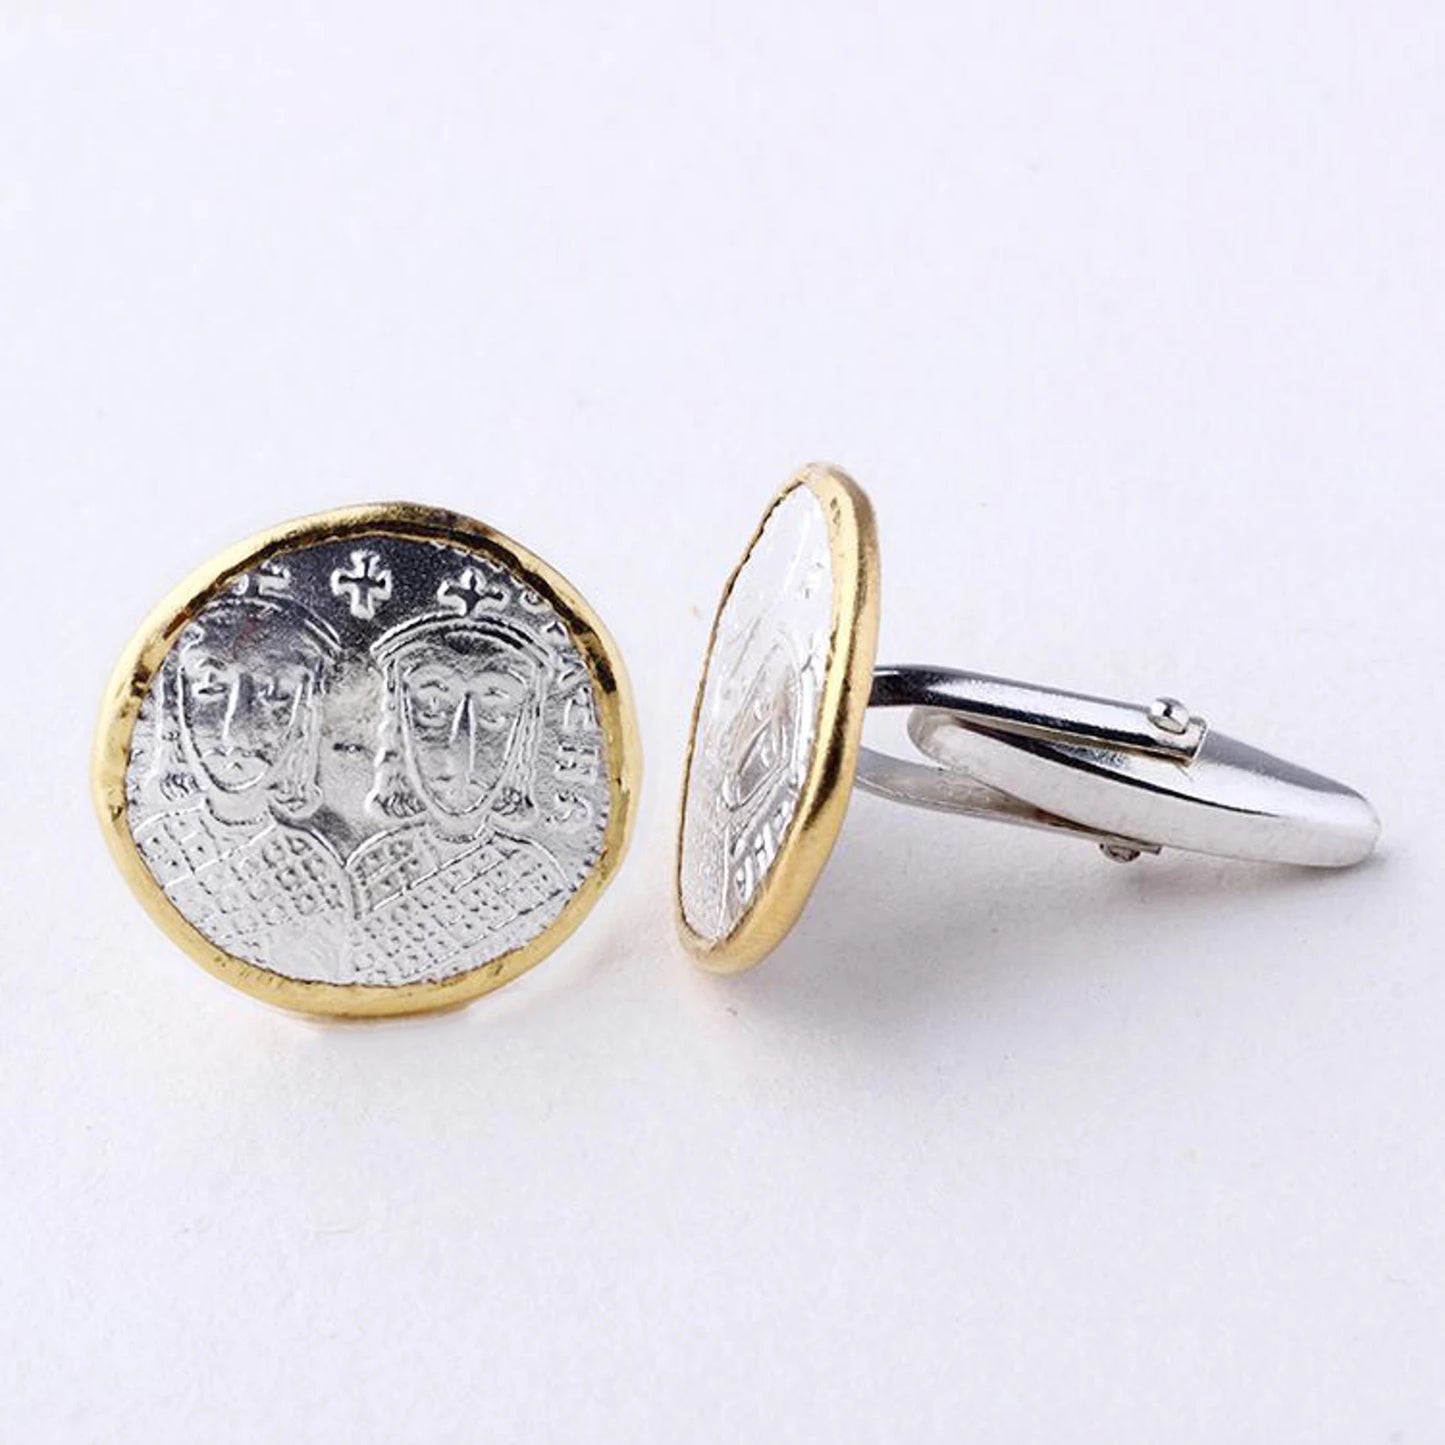 Ancient Greek Silver Coin Cufflink with 24K Gold